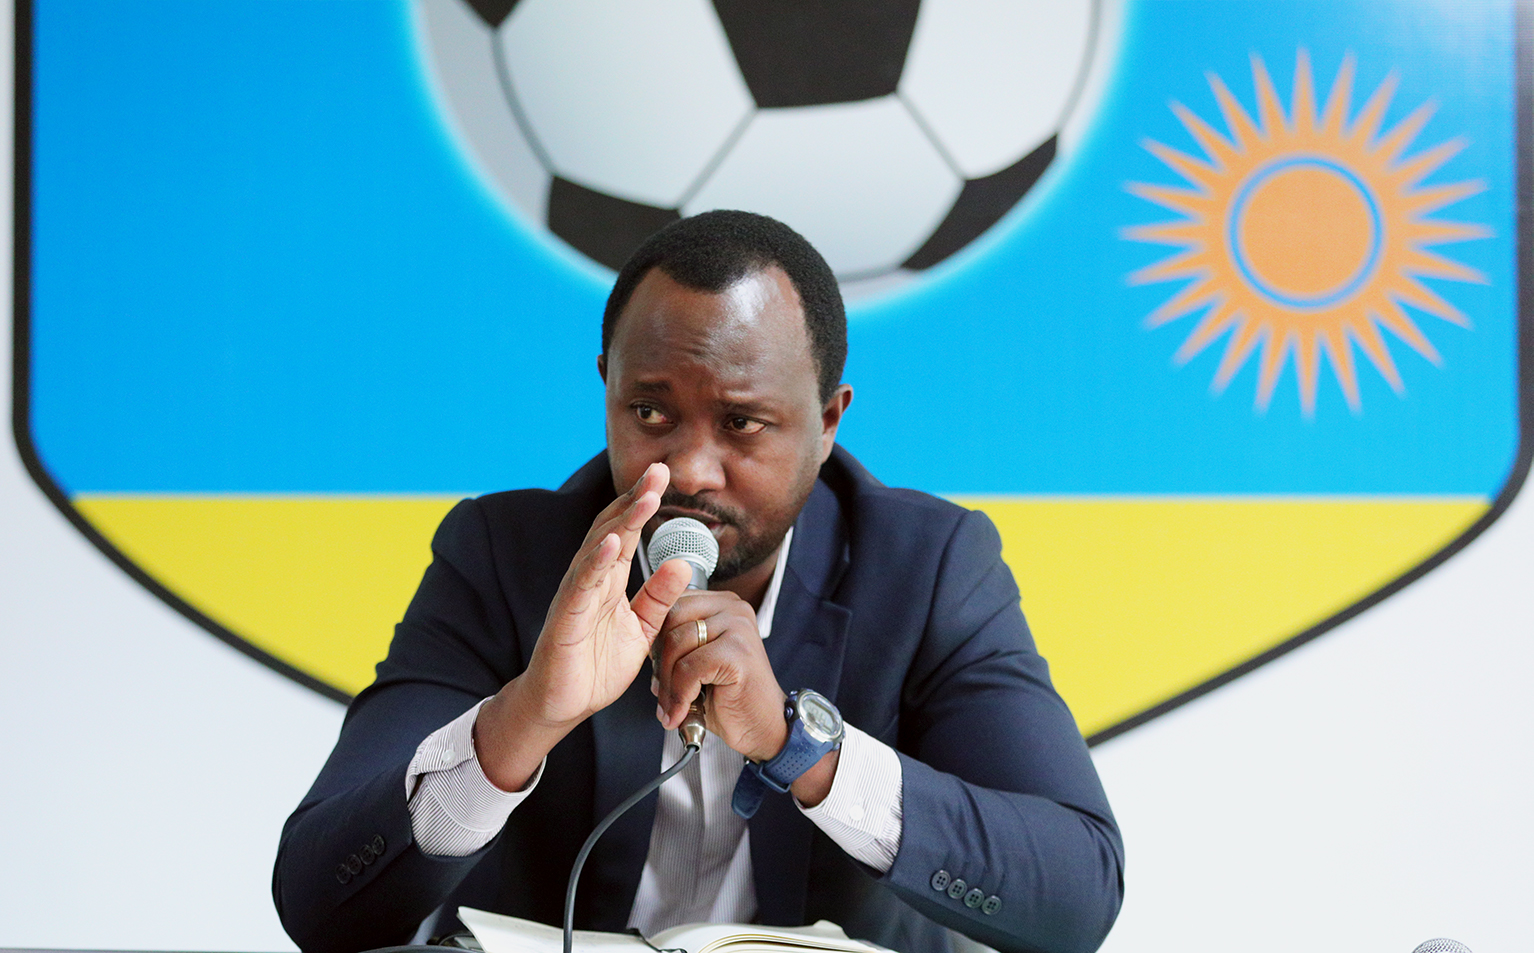 Vincent Mashami speaks to members of the press at Ferwafa headquarters on Wednesday, October 7, as he announced his Amavubi squad for Rwandaâ€™s double-header against Cape Verde. / Photo: Oliver Mugwiza.